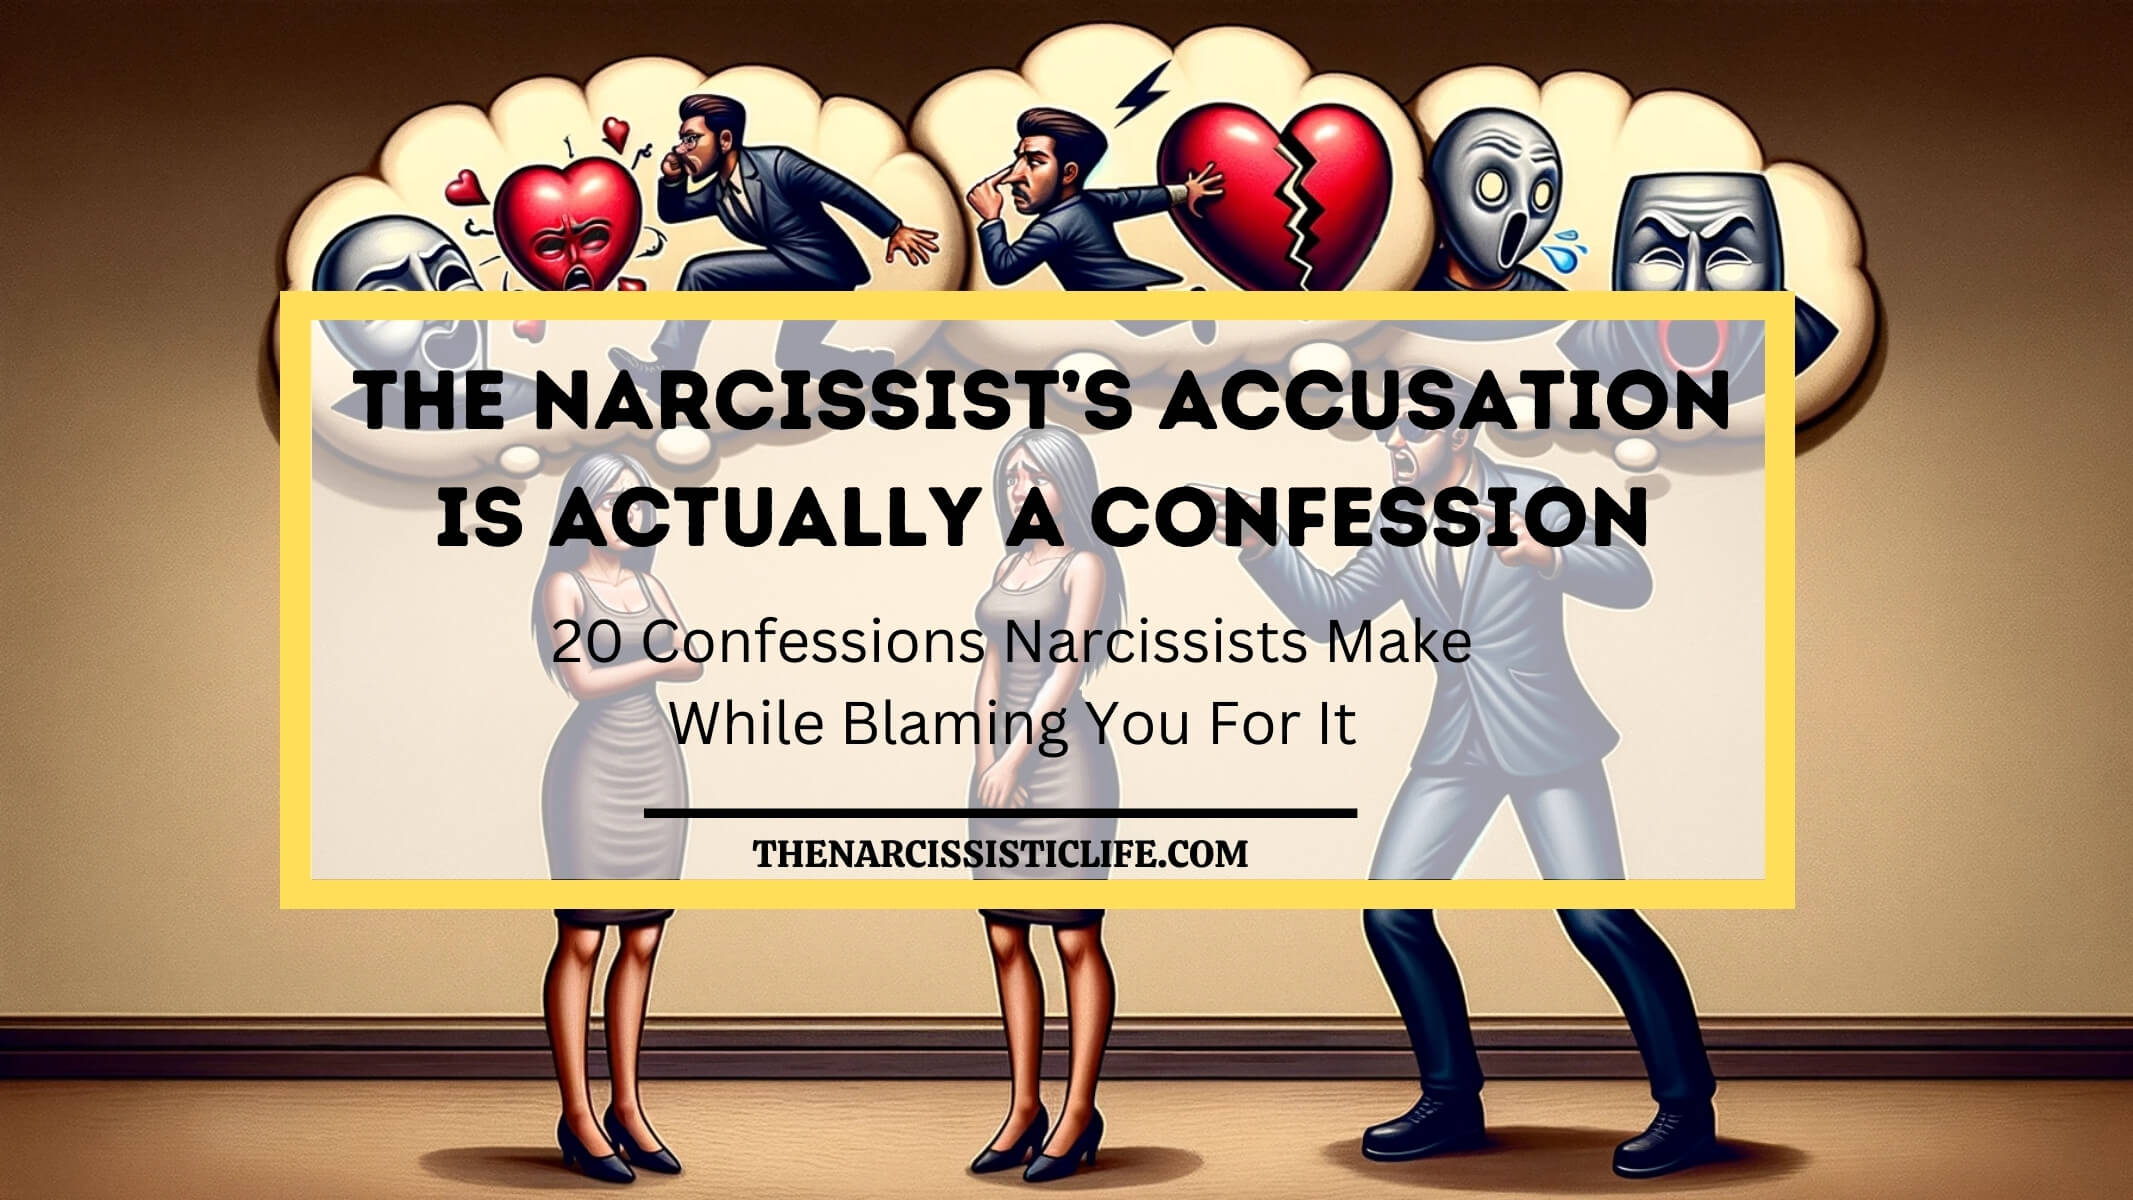 the narcissist's accusations are actually confessions